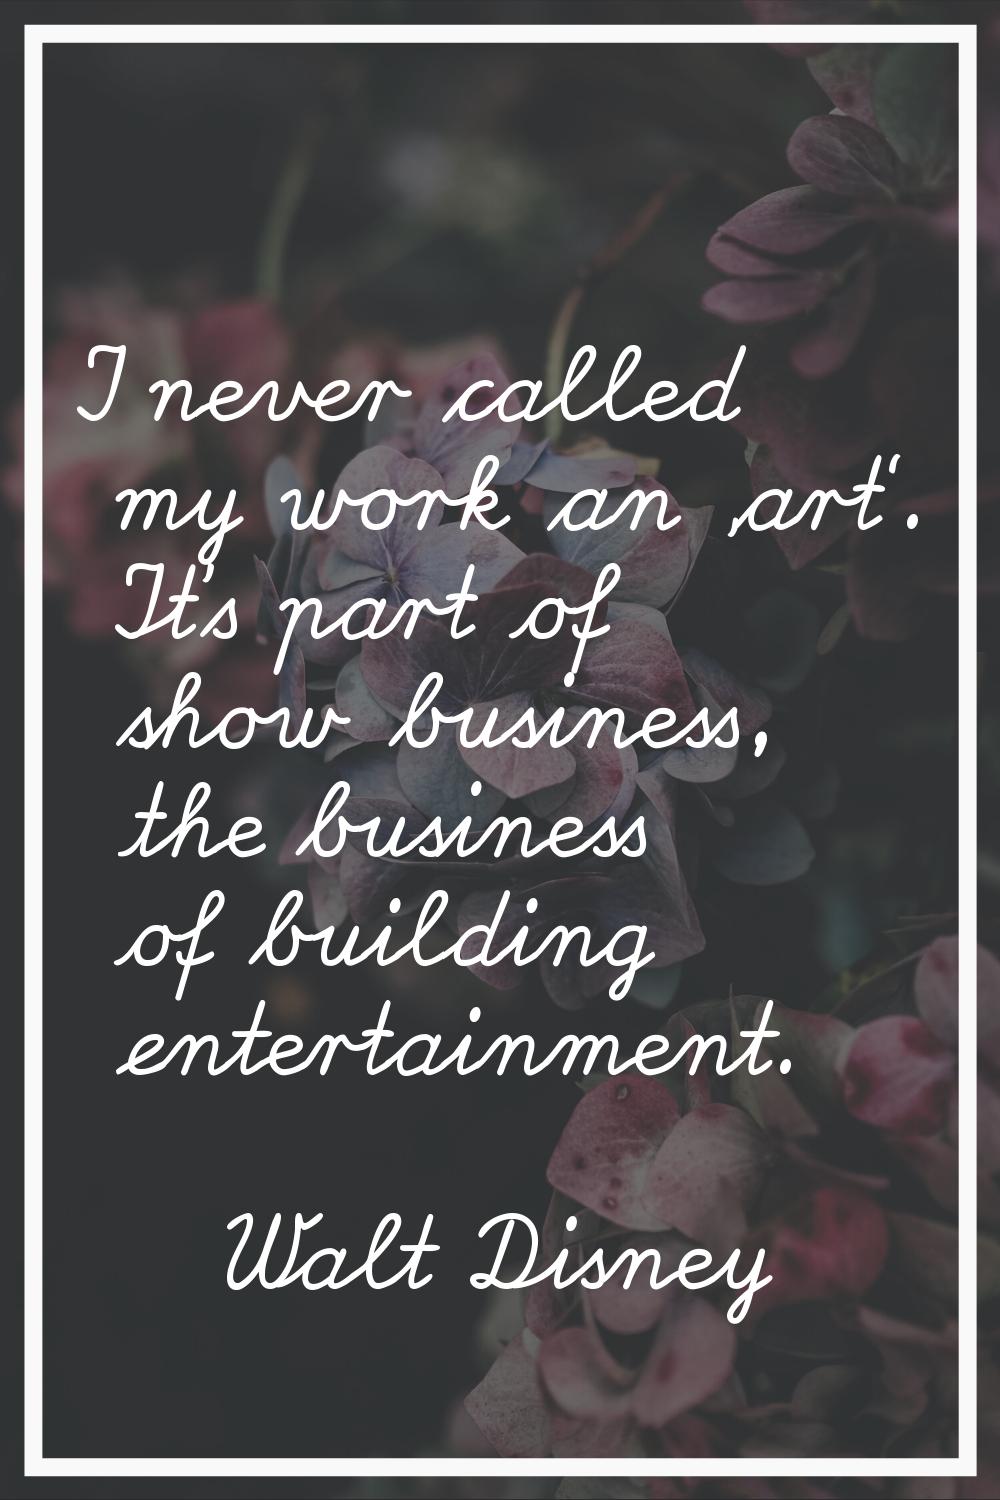 I never called my work an 'art'. It's part of show business, the business of building entertainment